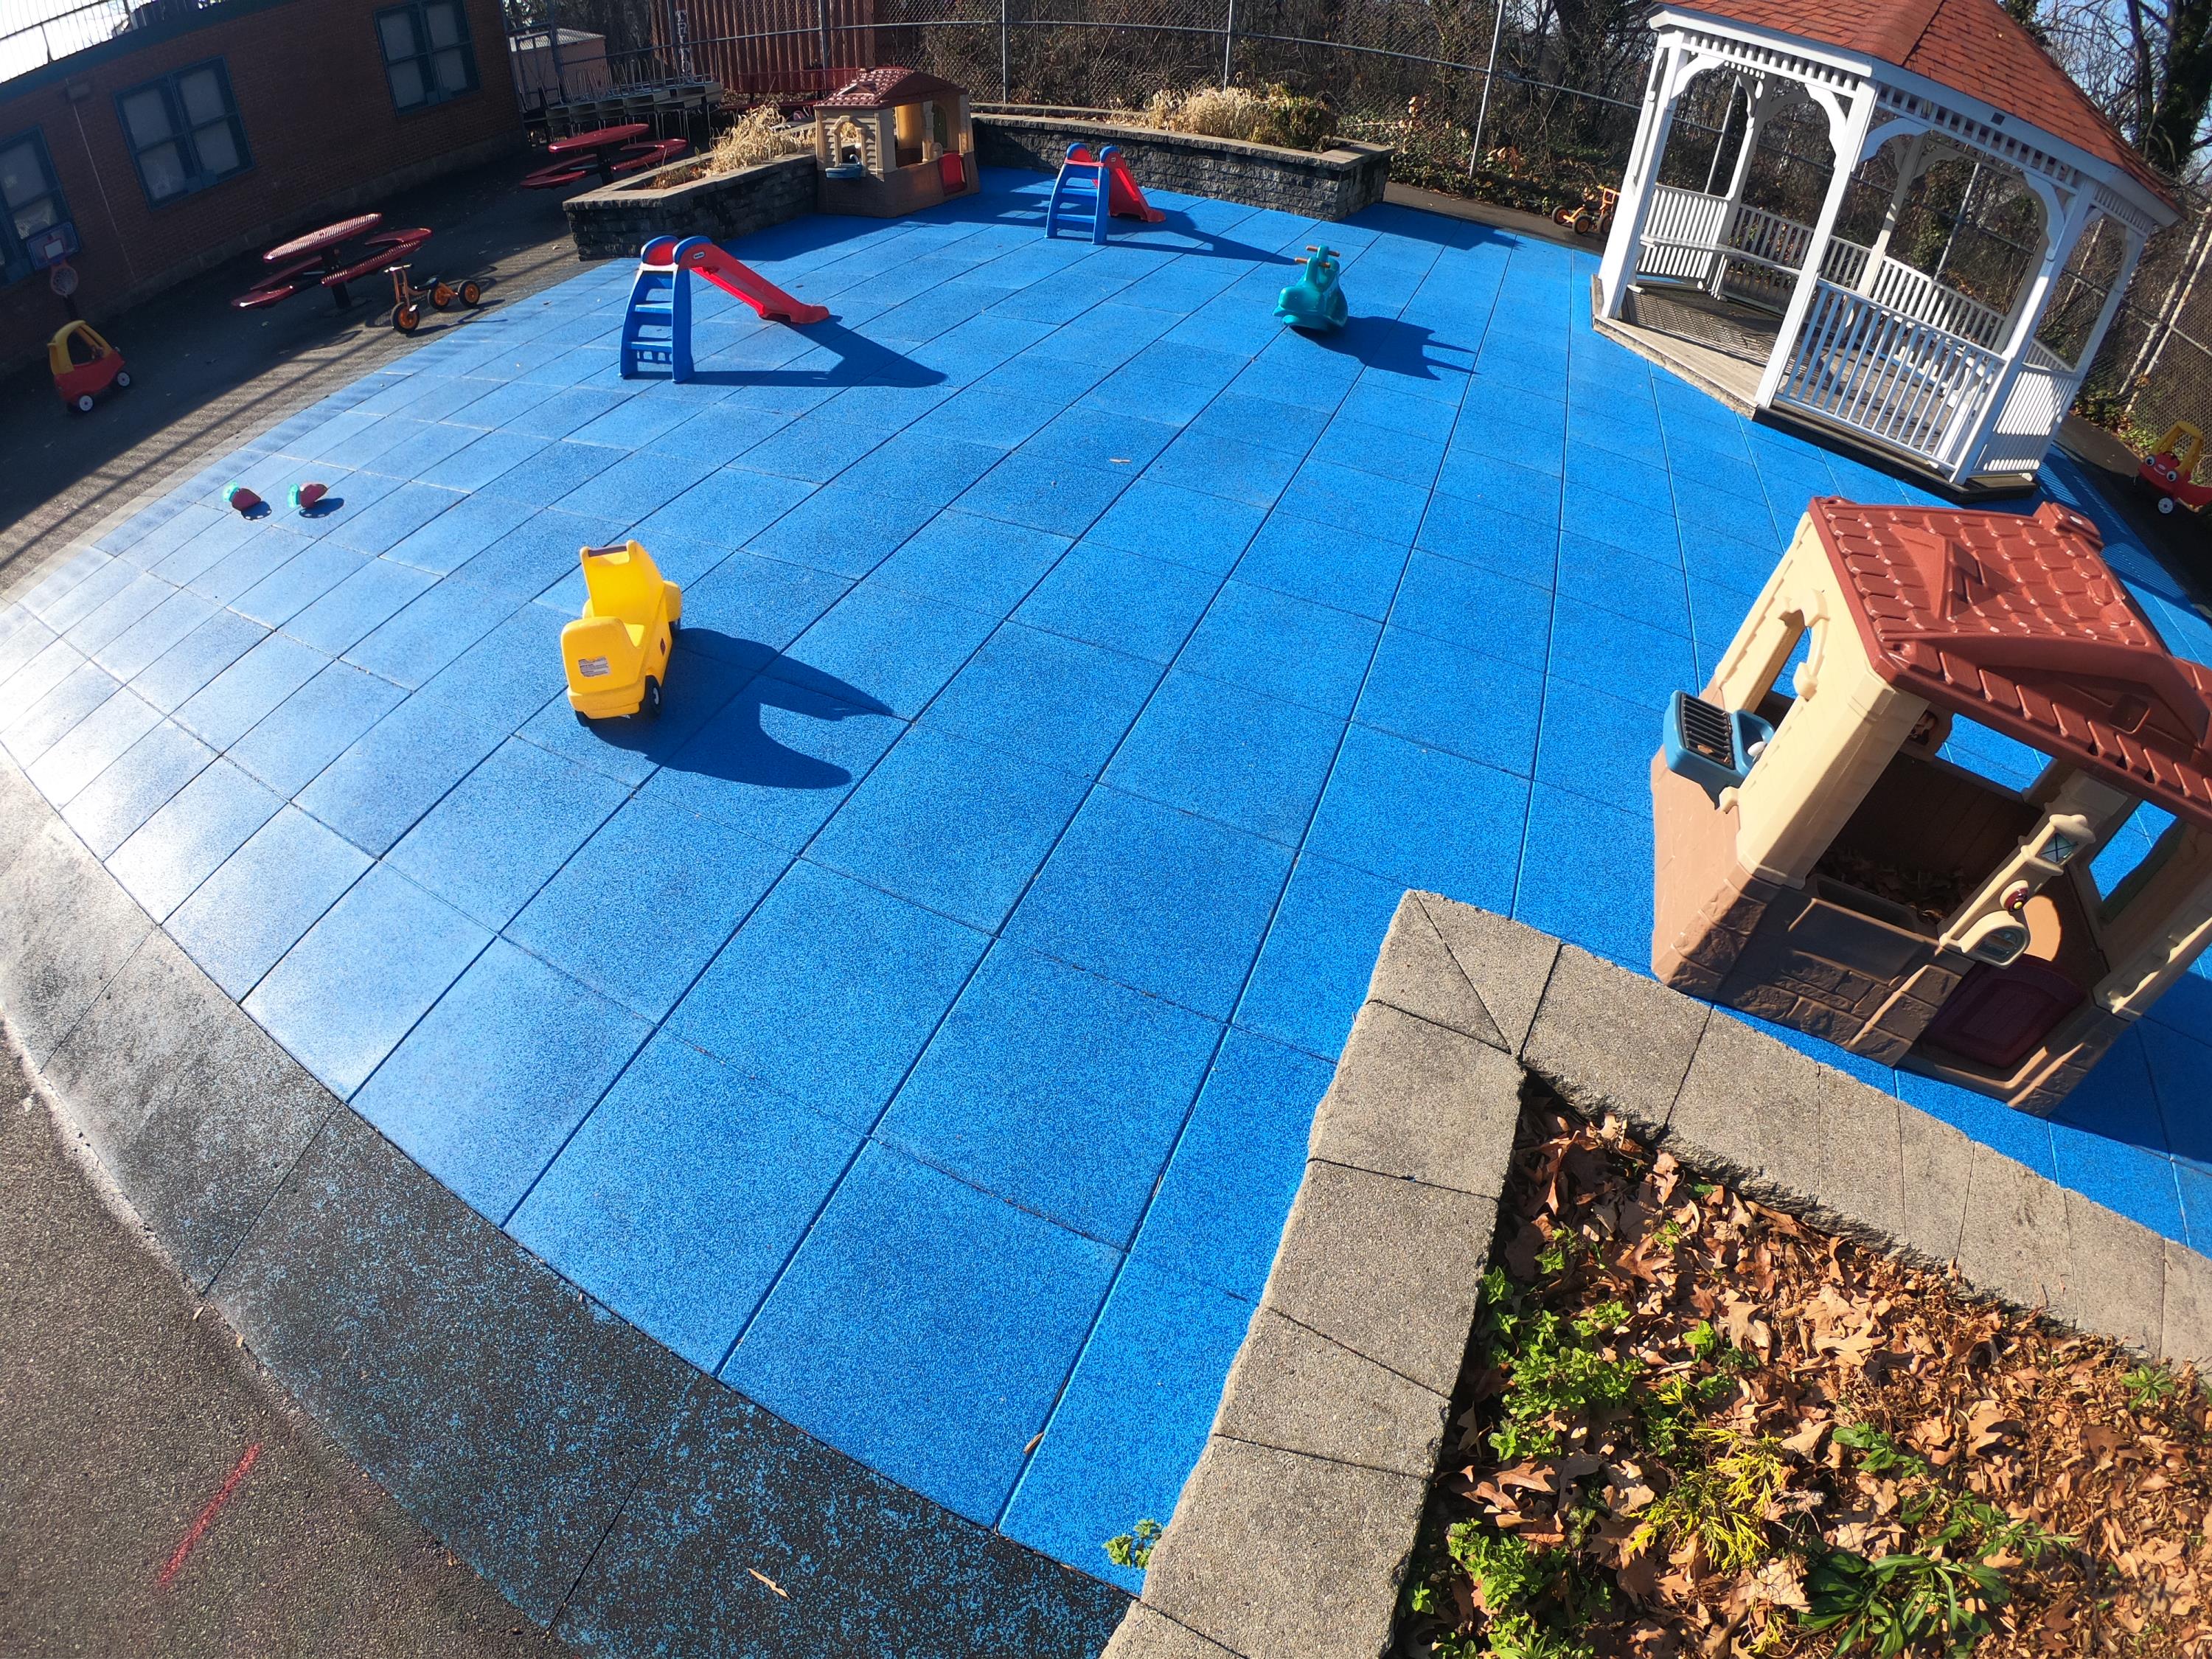 UNITY Surfacing at Daycare Center using Custom Blended TPV Top Tiles